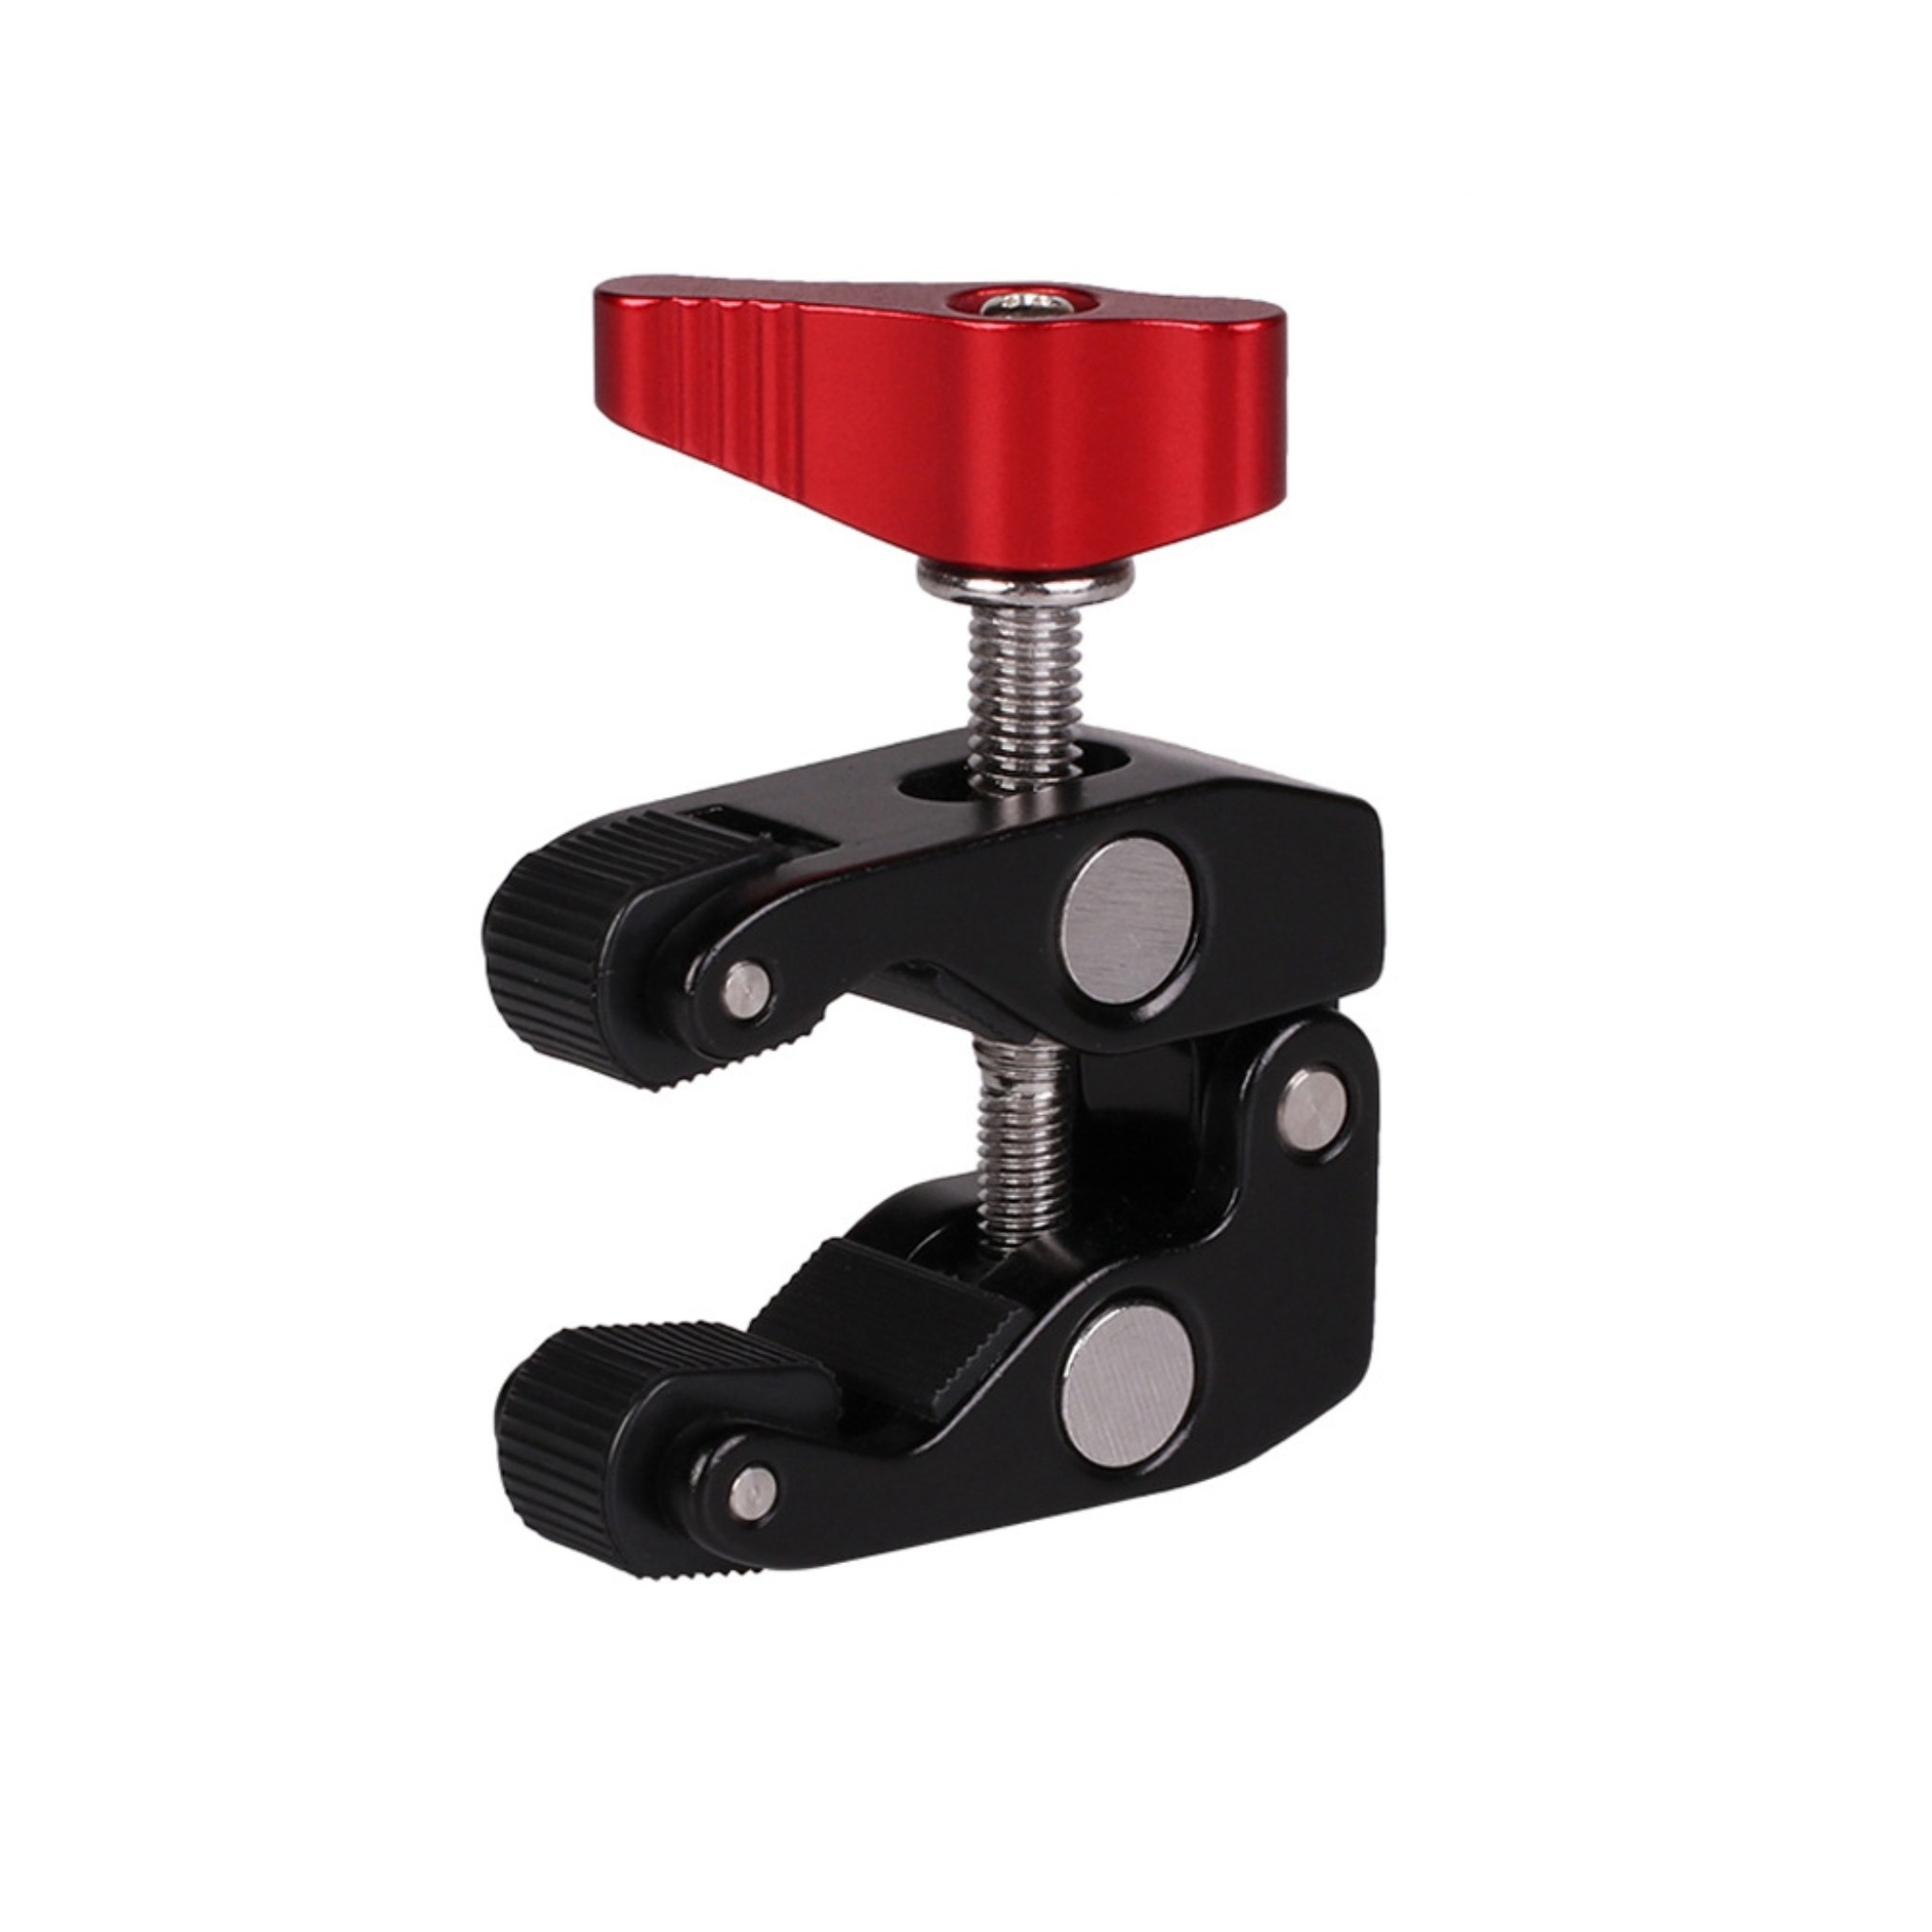 Camera Clamp Crab, with Rubber & Metal Material